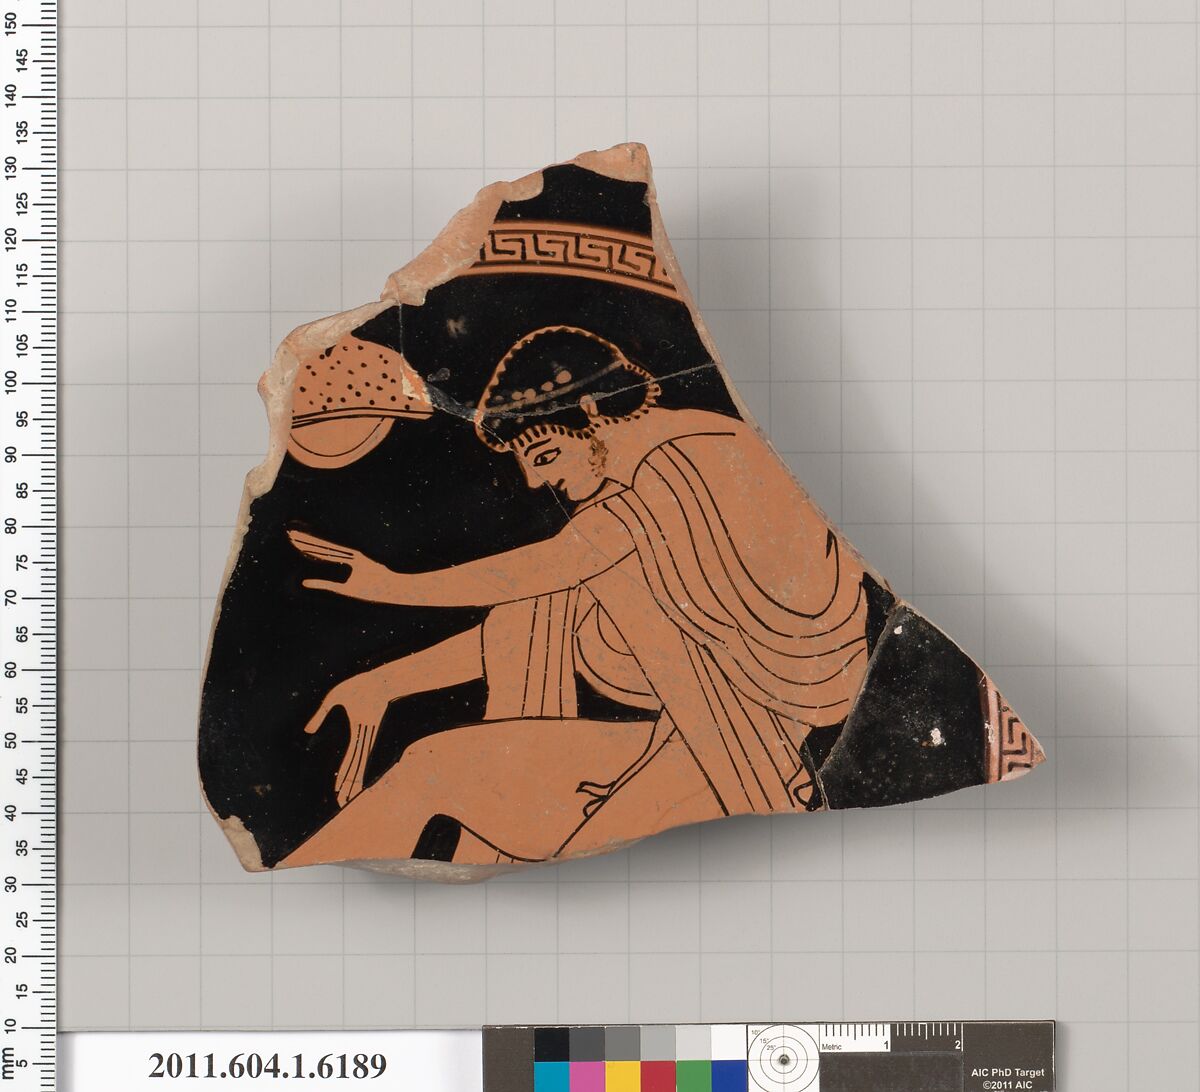 Terracotta fragment of a kylix (drinking cup), Attributed to the Painter of Berlin 2268 [DvB], Terracotta, Greek, Attic 